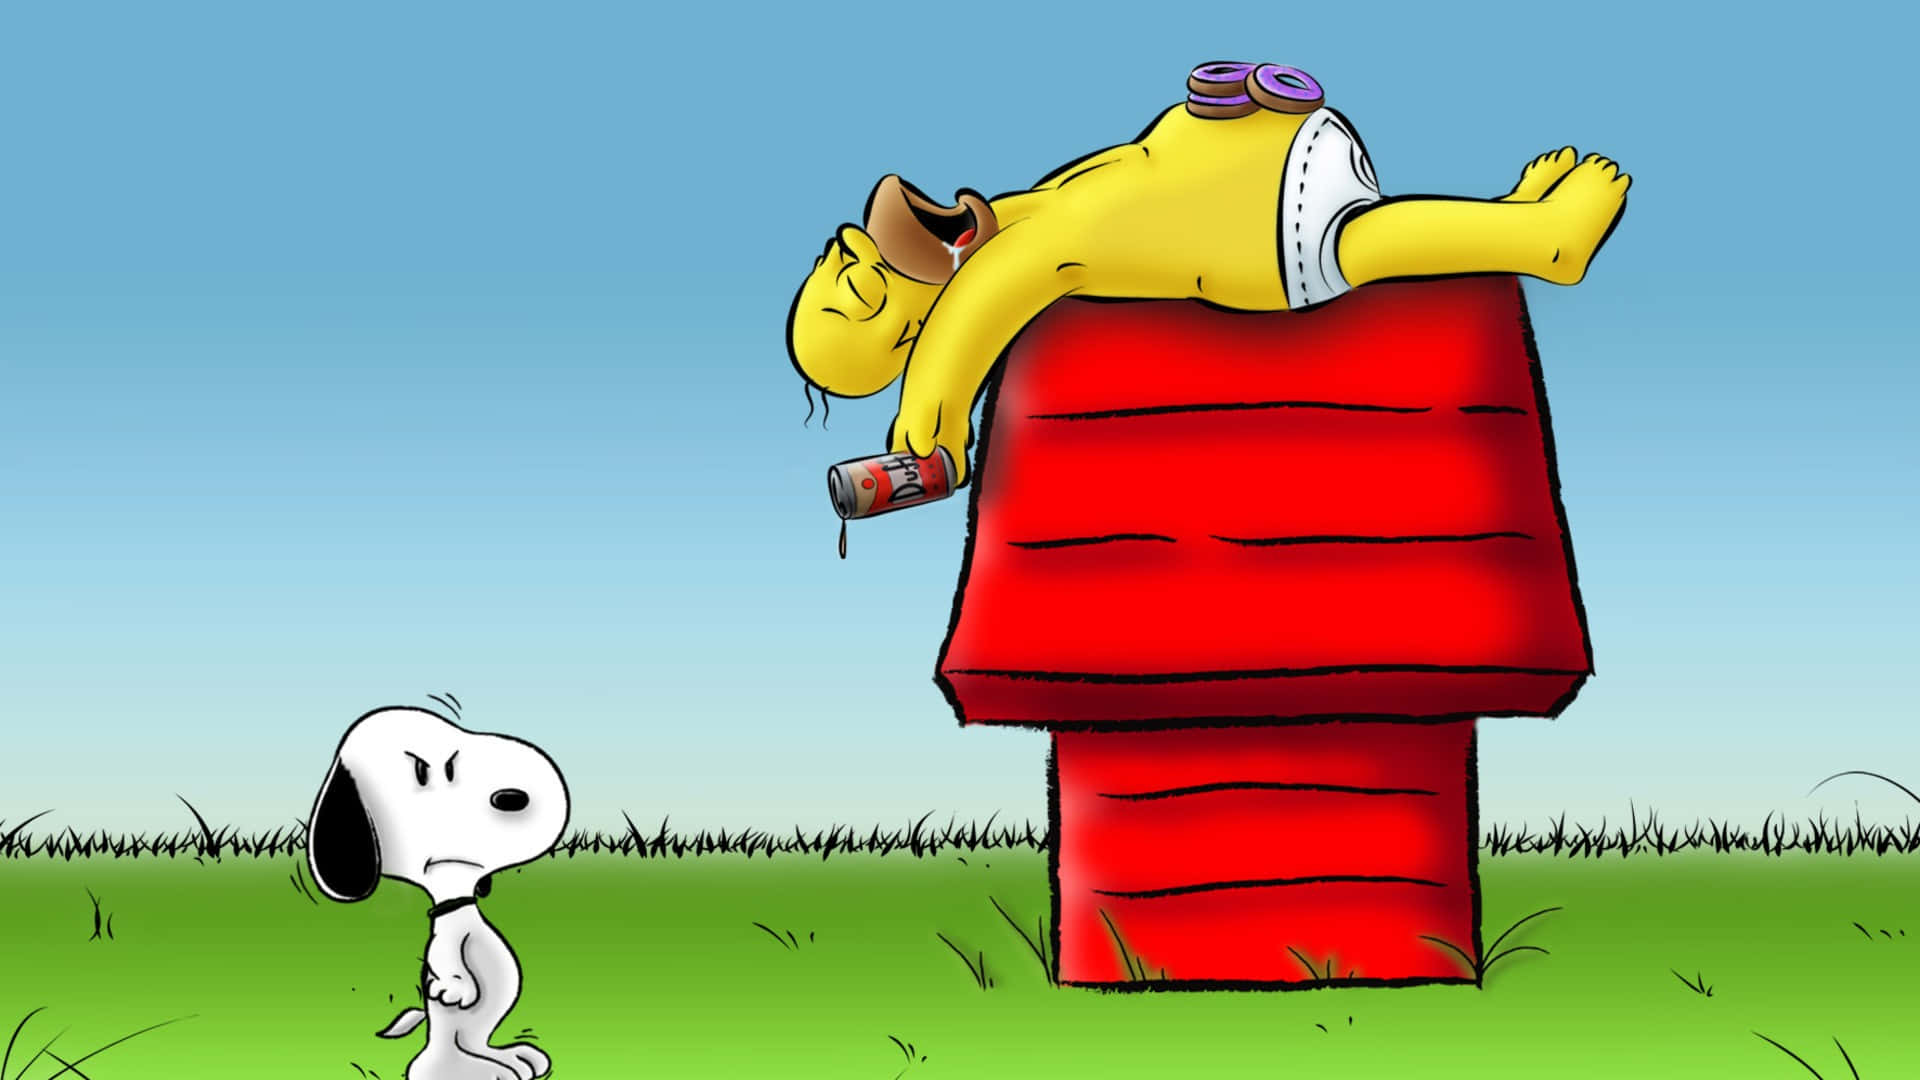 https://wallpapers.com/images/featured/snoopy-background-h8uzzxqj14w6l015.jpg